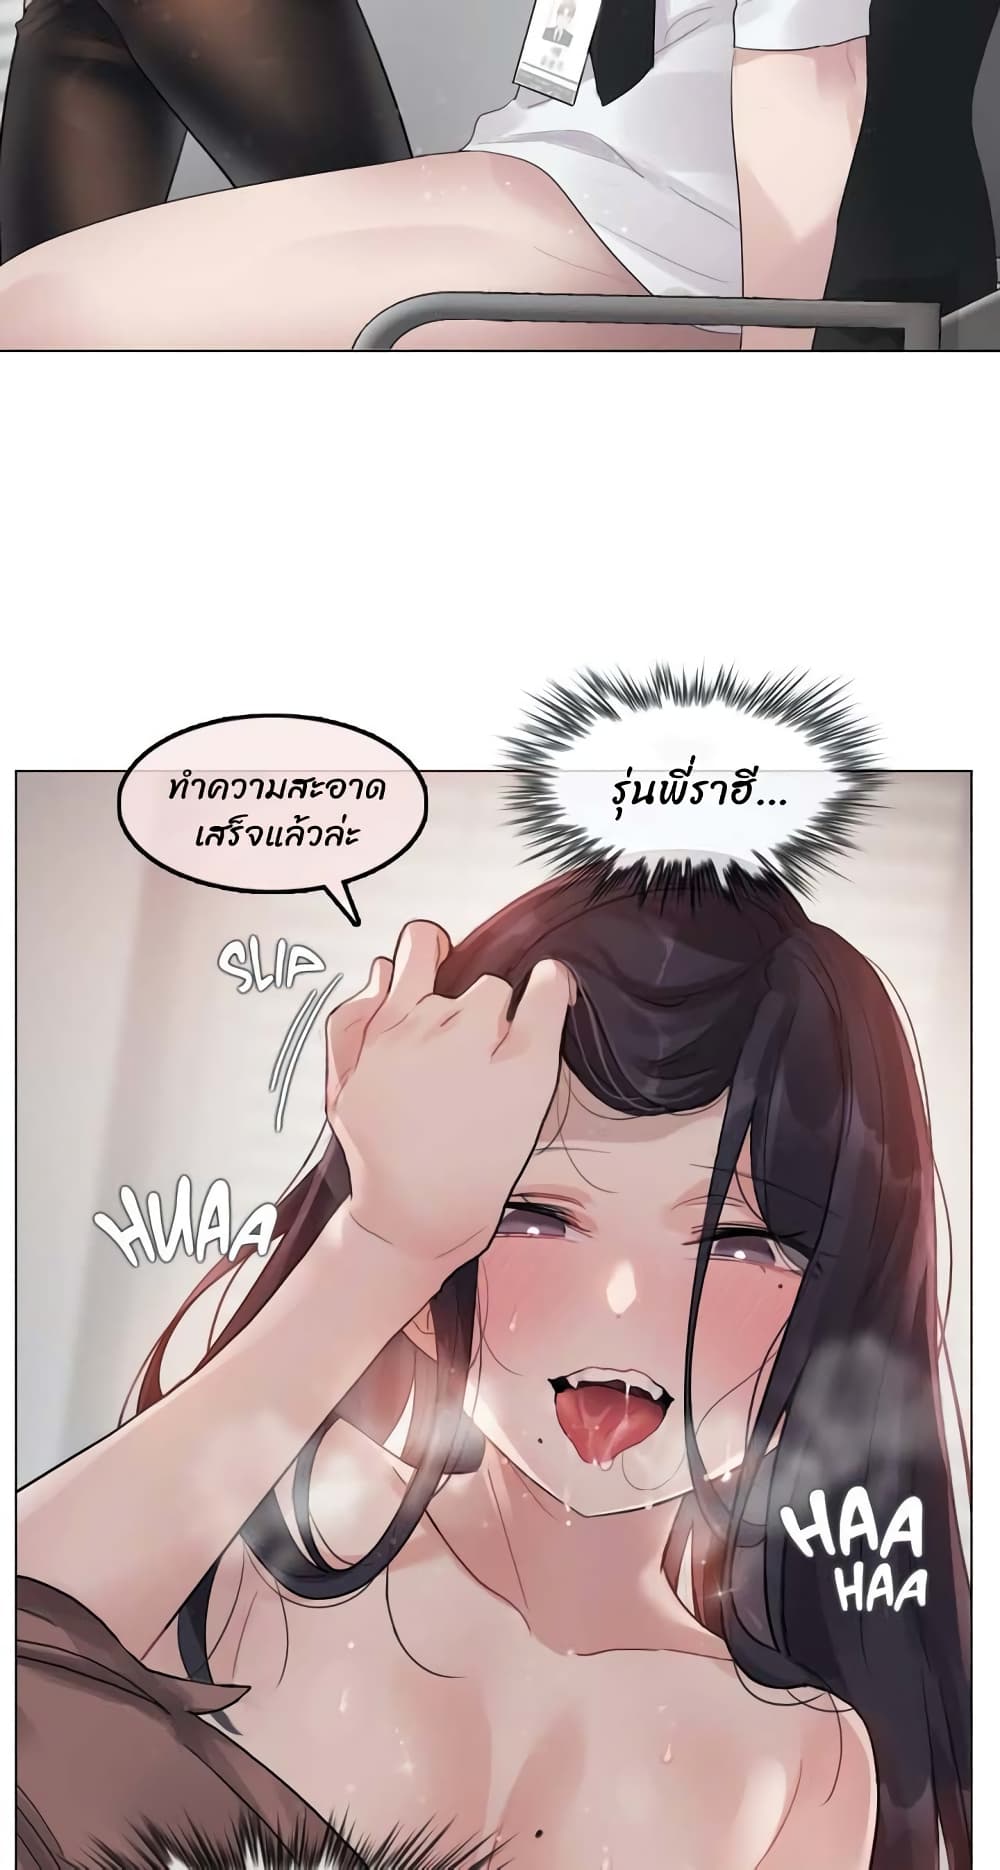 A Pervert's Daily Life 97 23